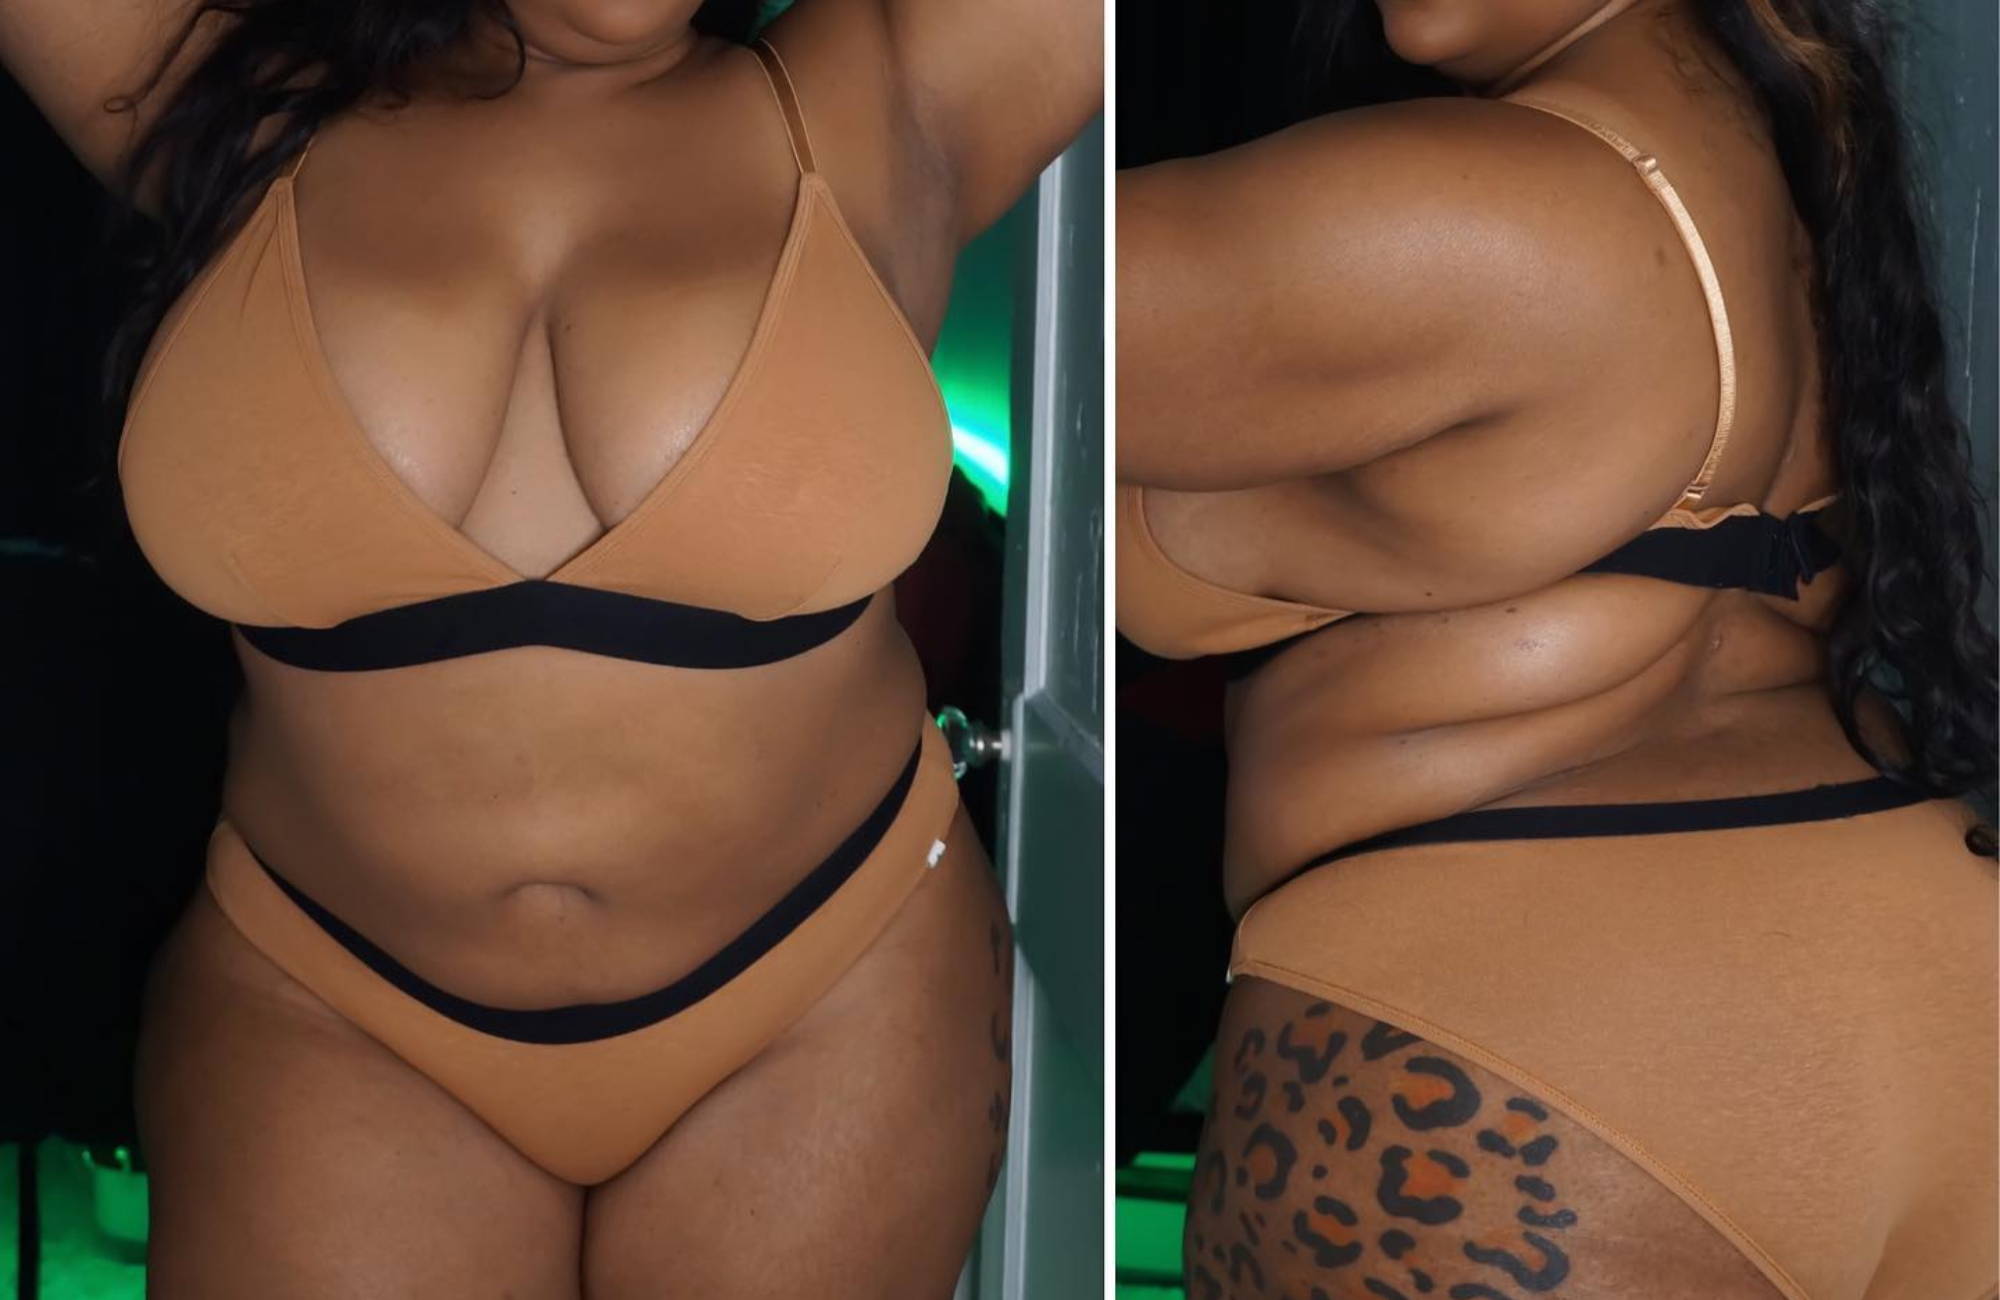  a plus size woman wearing a matching nude bra and undies set seen from two angles